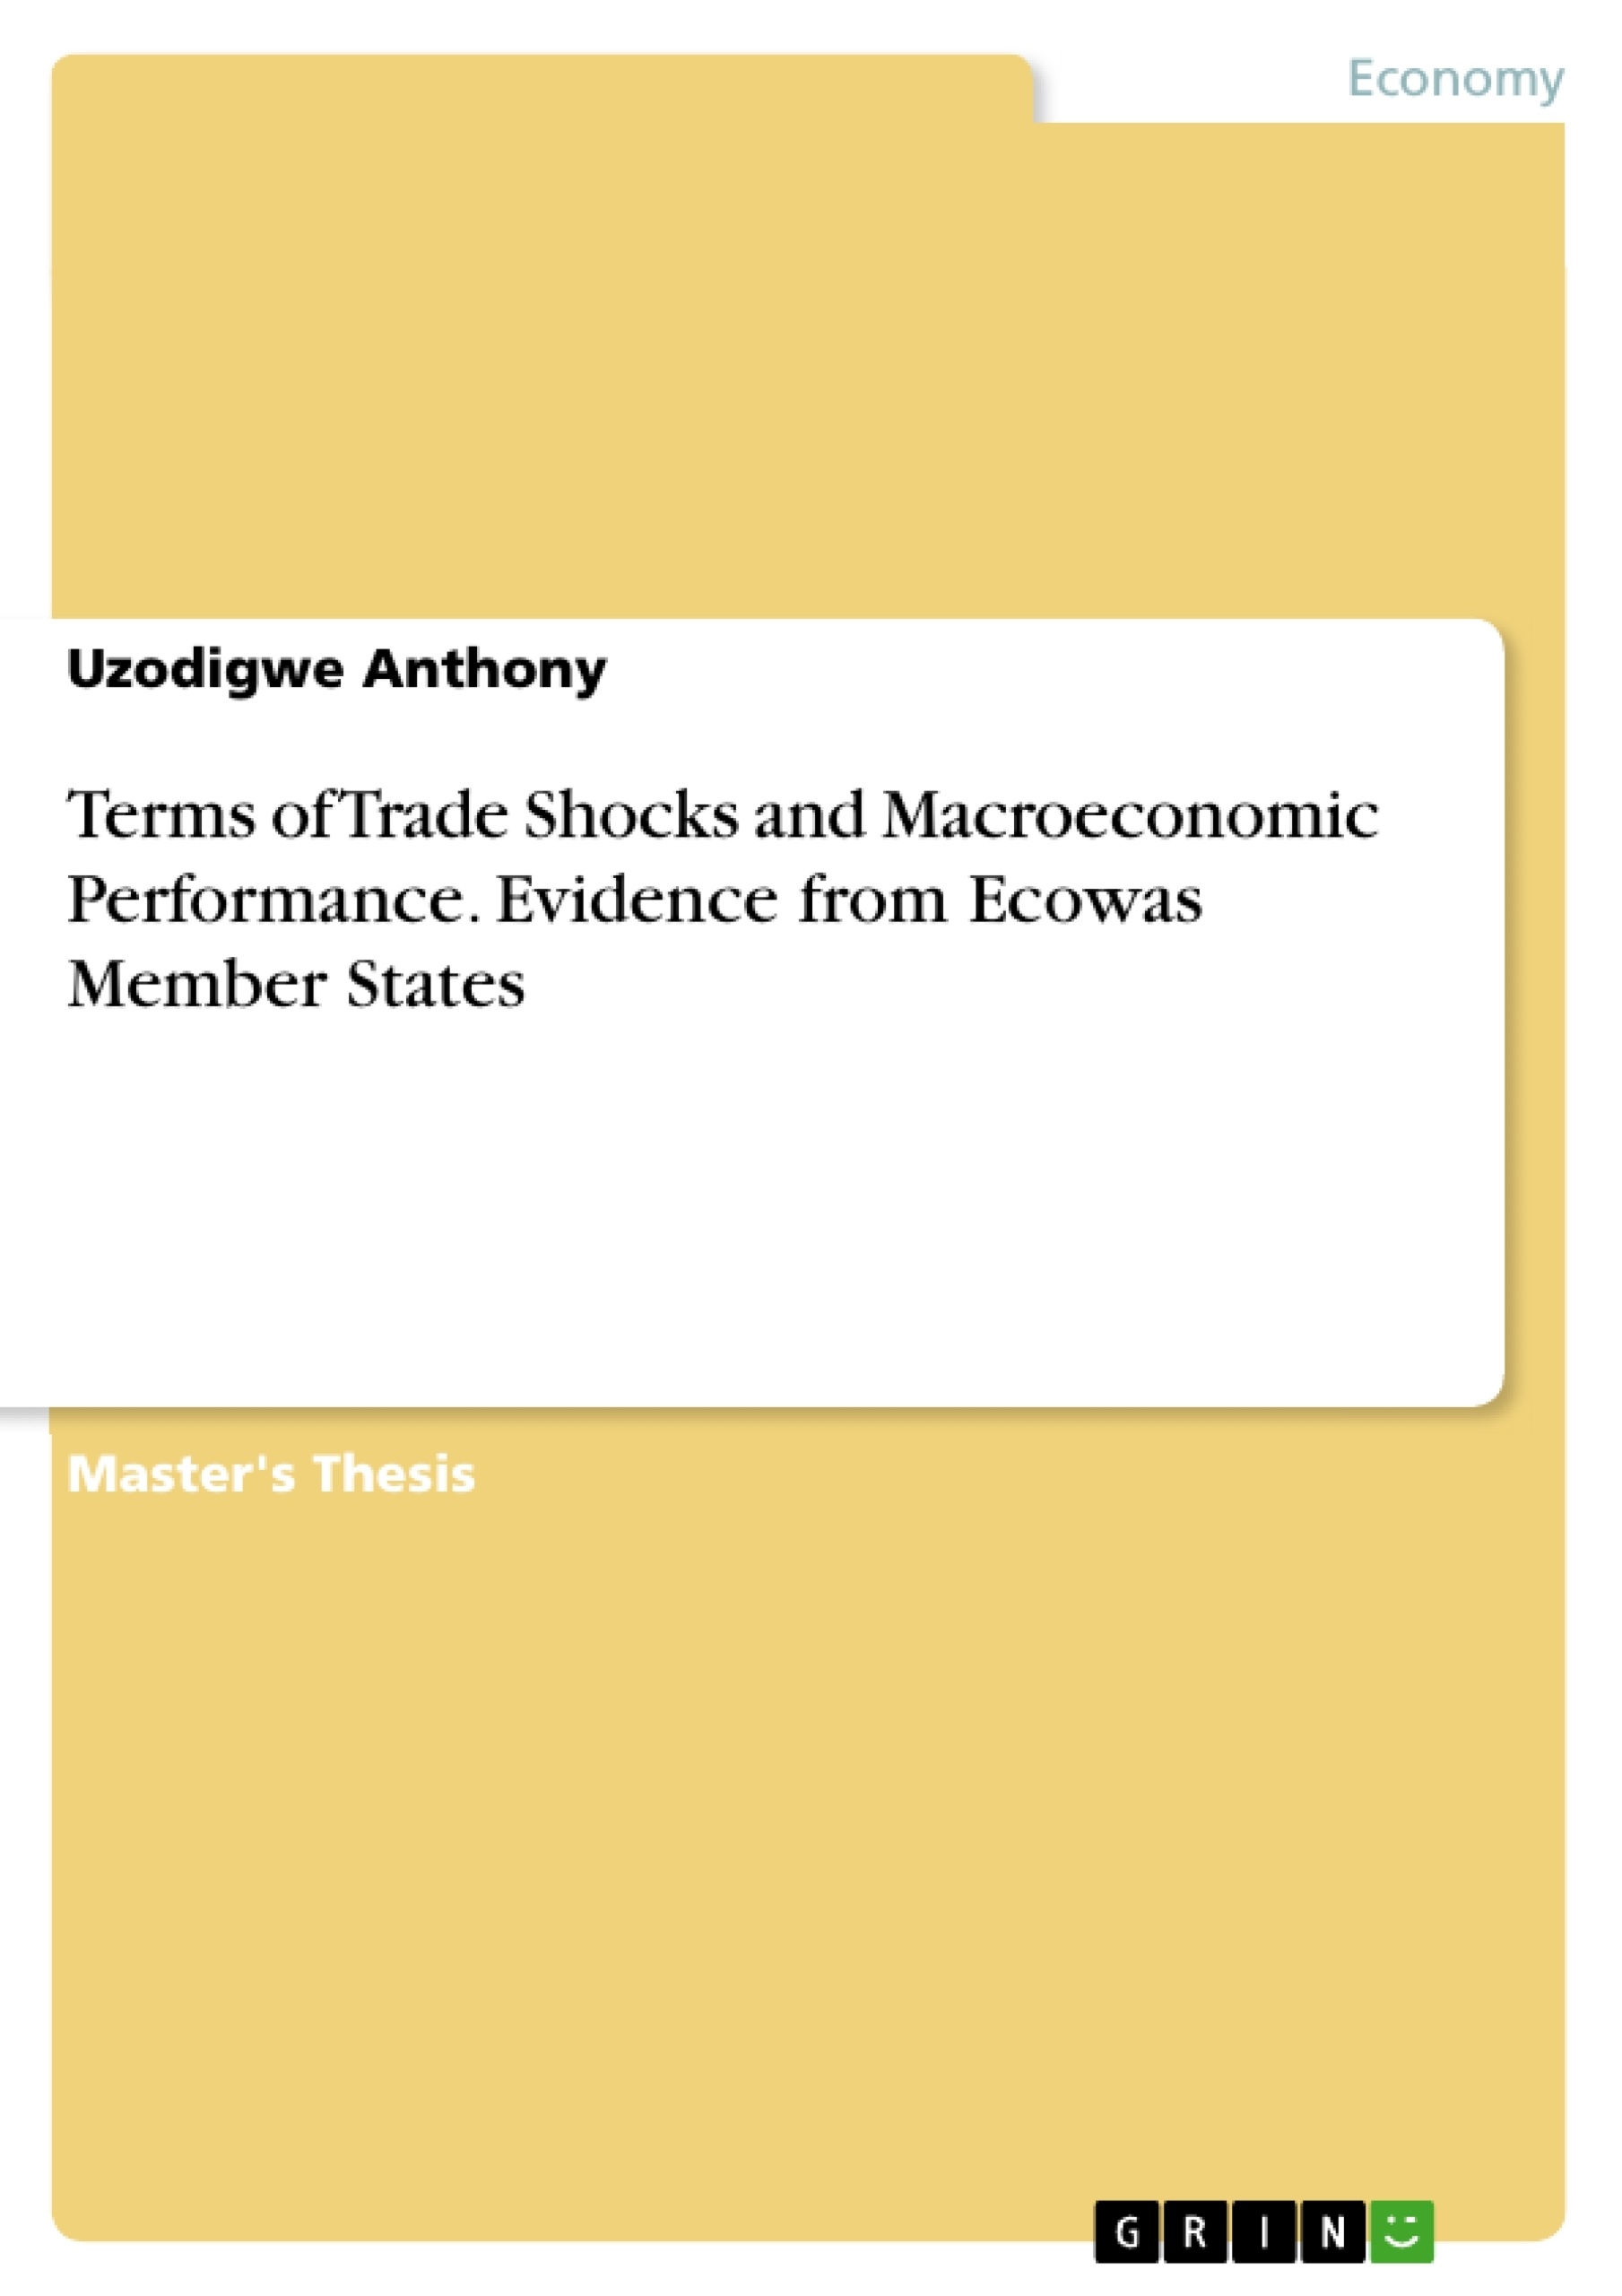 Title: Terms of Trade Shocks and Macroeconomic Performance. Evidence from Ecowas Member States